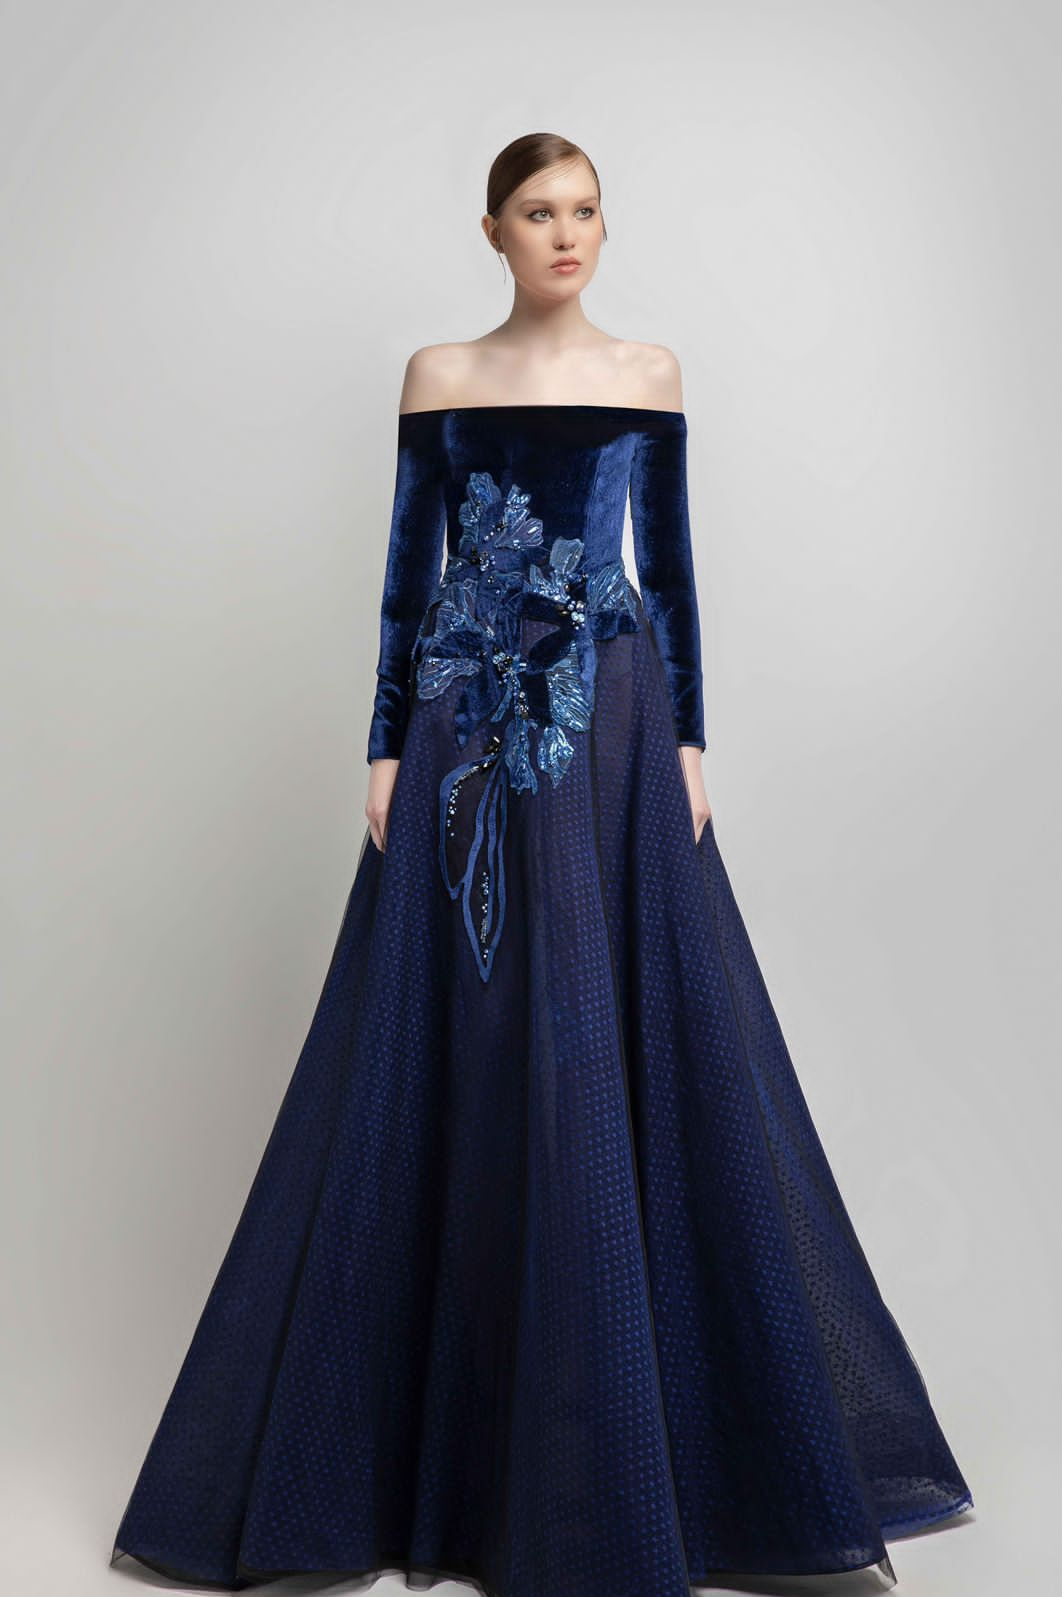 Crepe Strapless Deep-V Crystal Embellished Gown | Christian Siriano